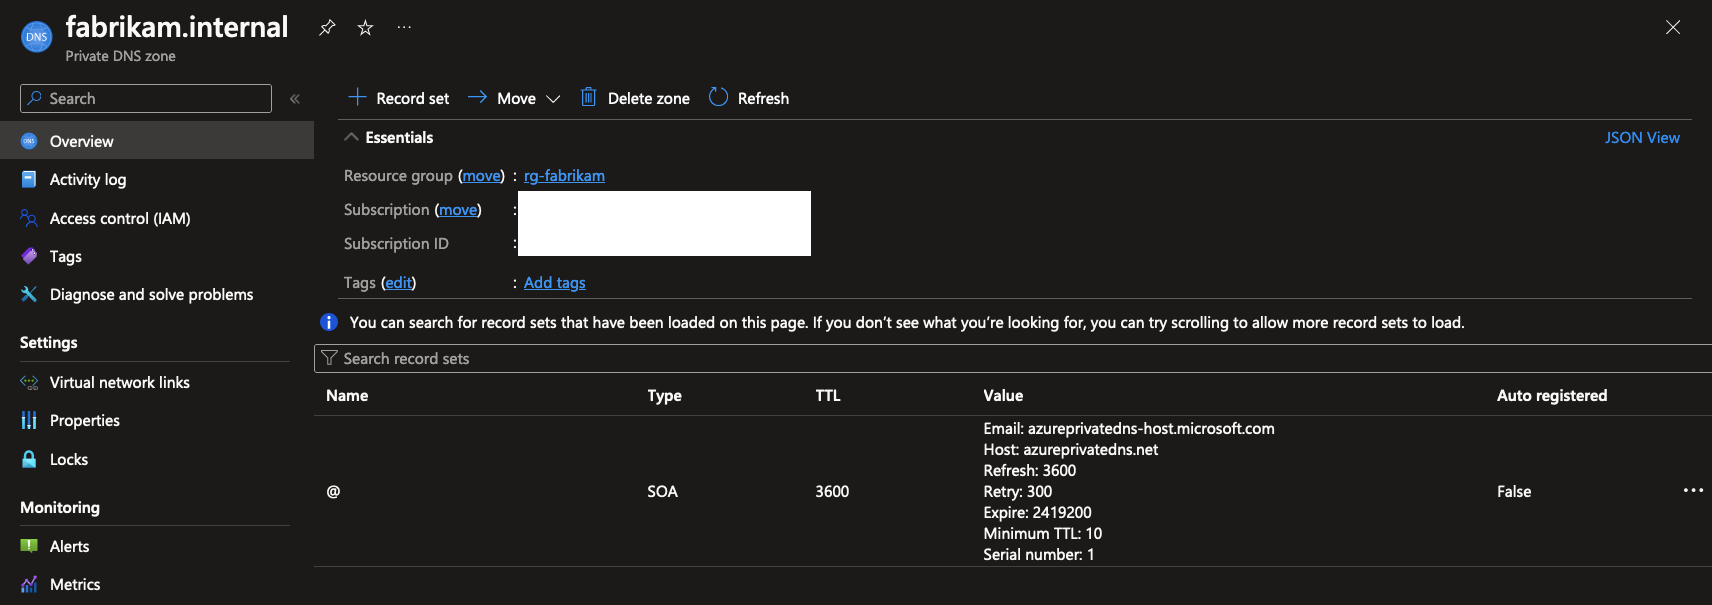 Screenshot of Azure portal showing an empty private dns zone containing only a SOA record.